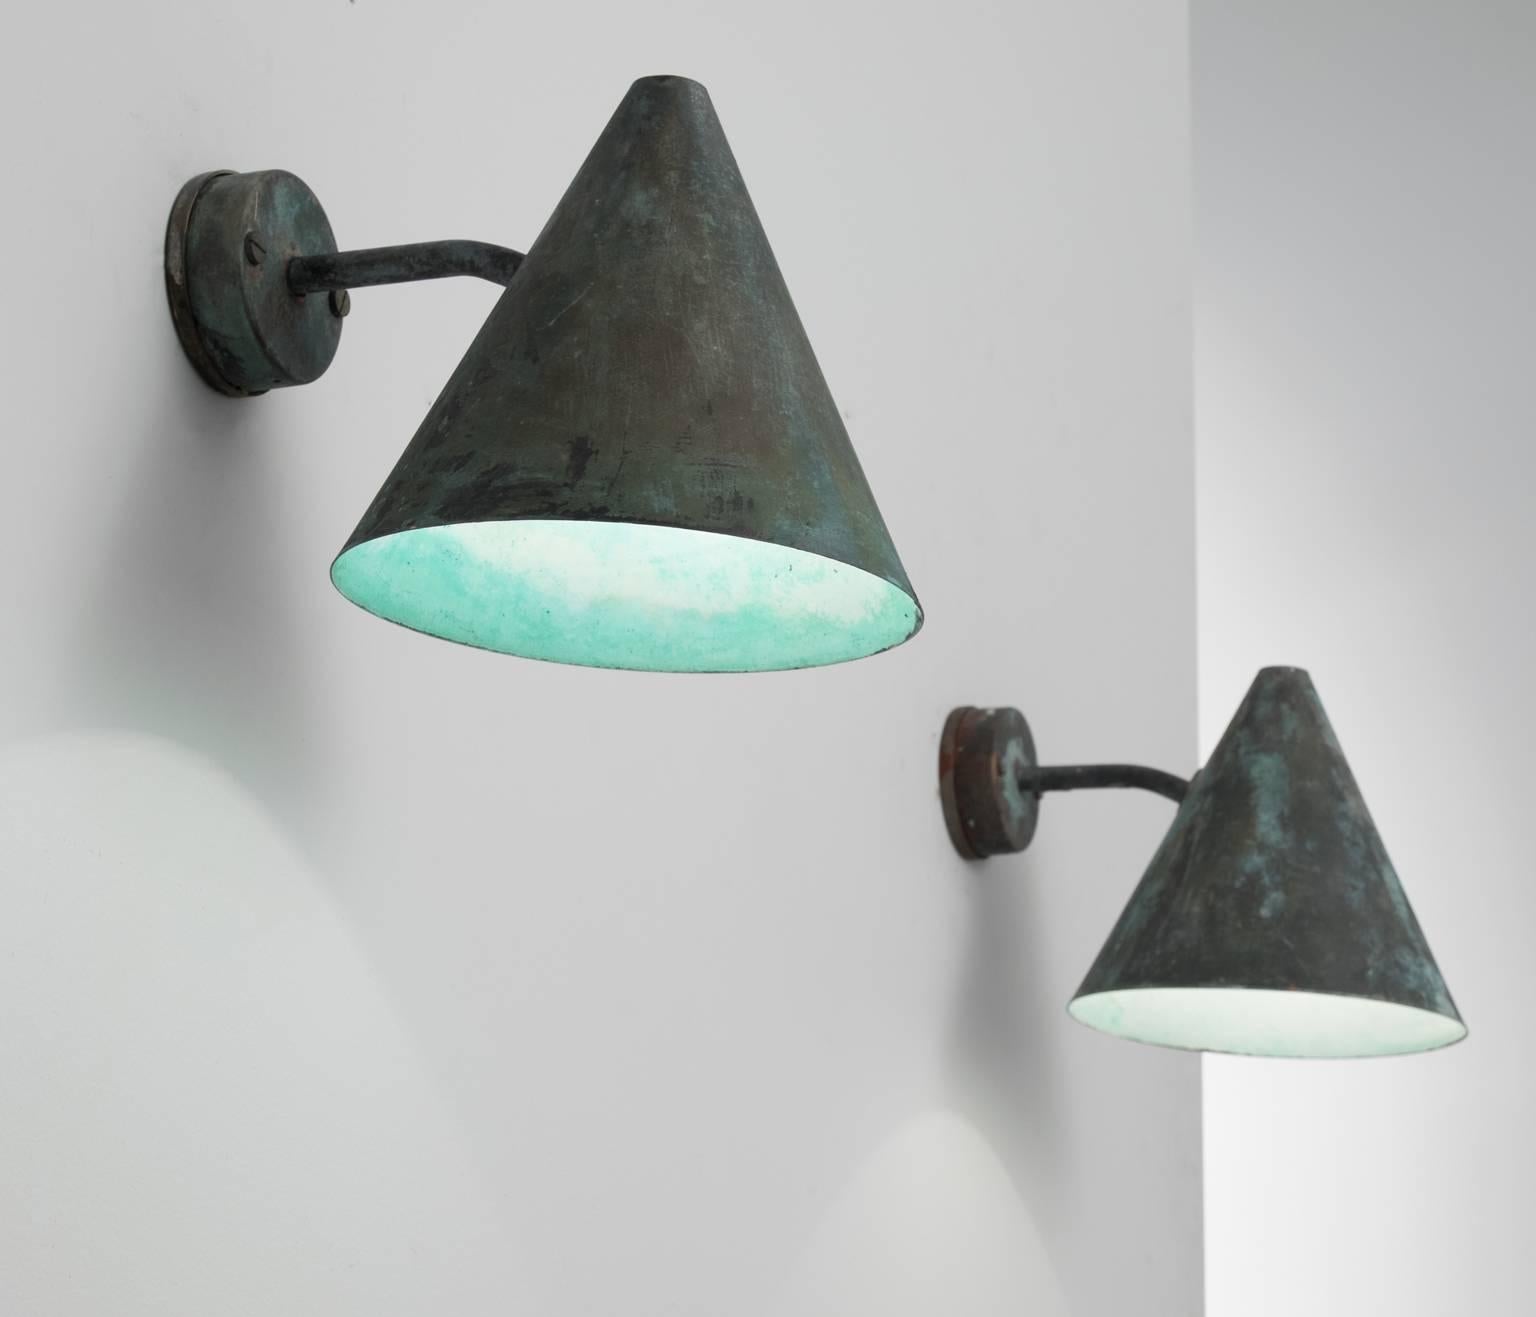 Set of two wall lights in copper by Hans-Agne Jakobsson for AB Markaryd, Sweden, 1950s.

Set of two cone-shaped wall lights designed by Hans-Agne Jakobsson for AB Markaryd in beautifully patinated copper. The light this model shines creates a